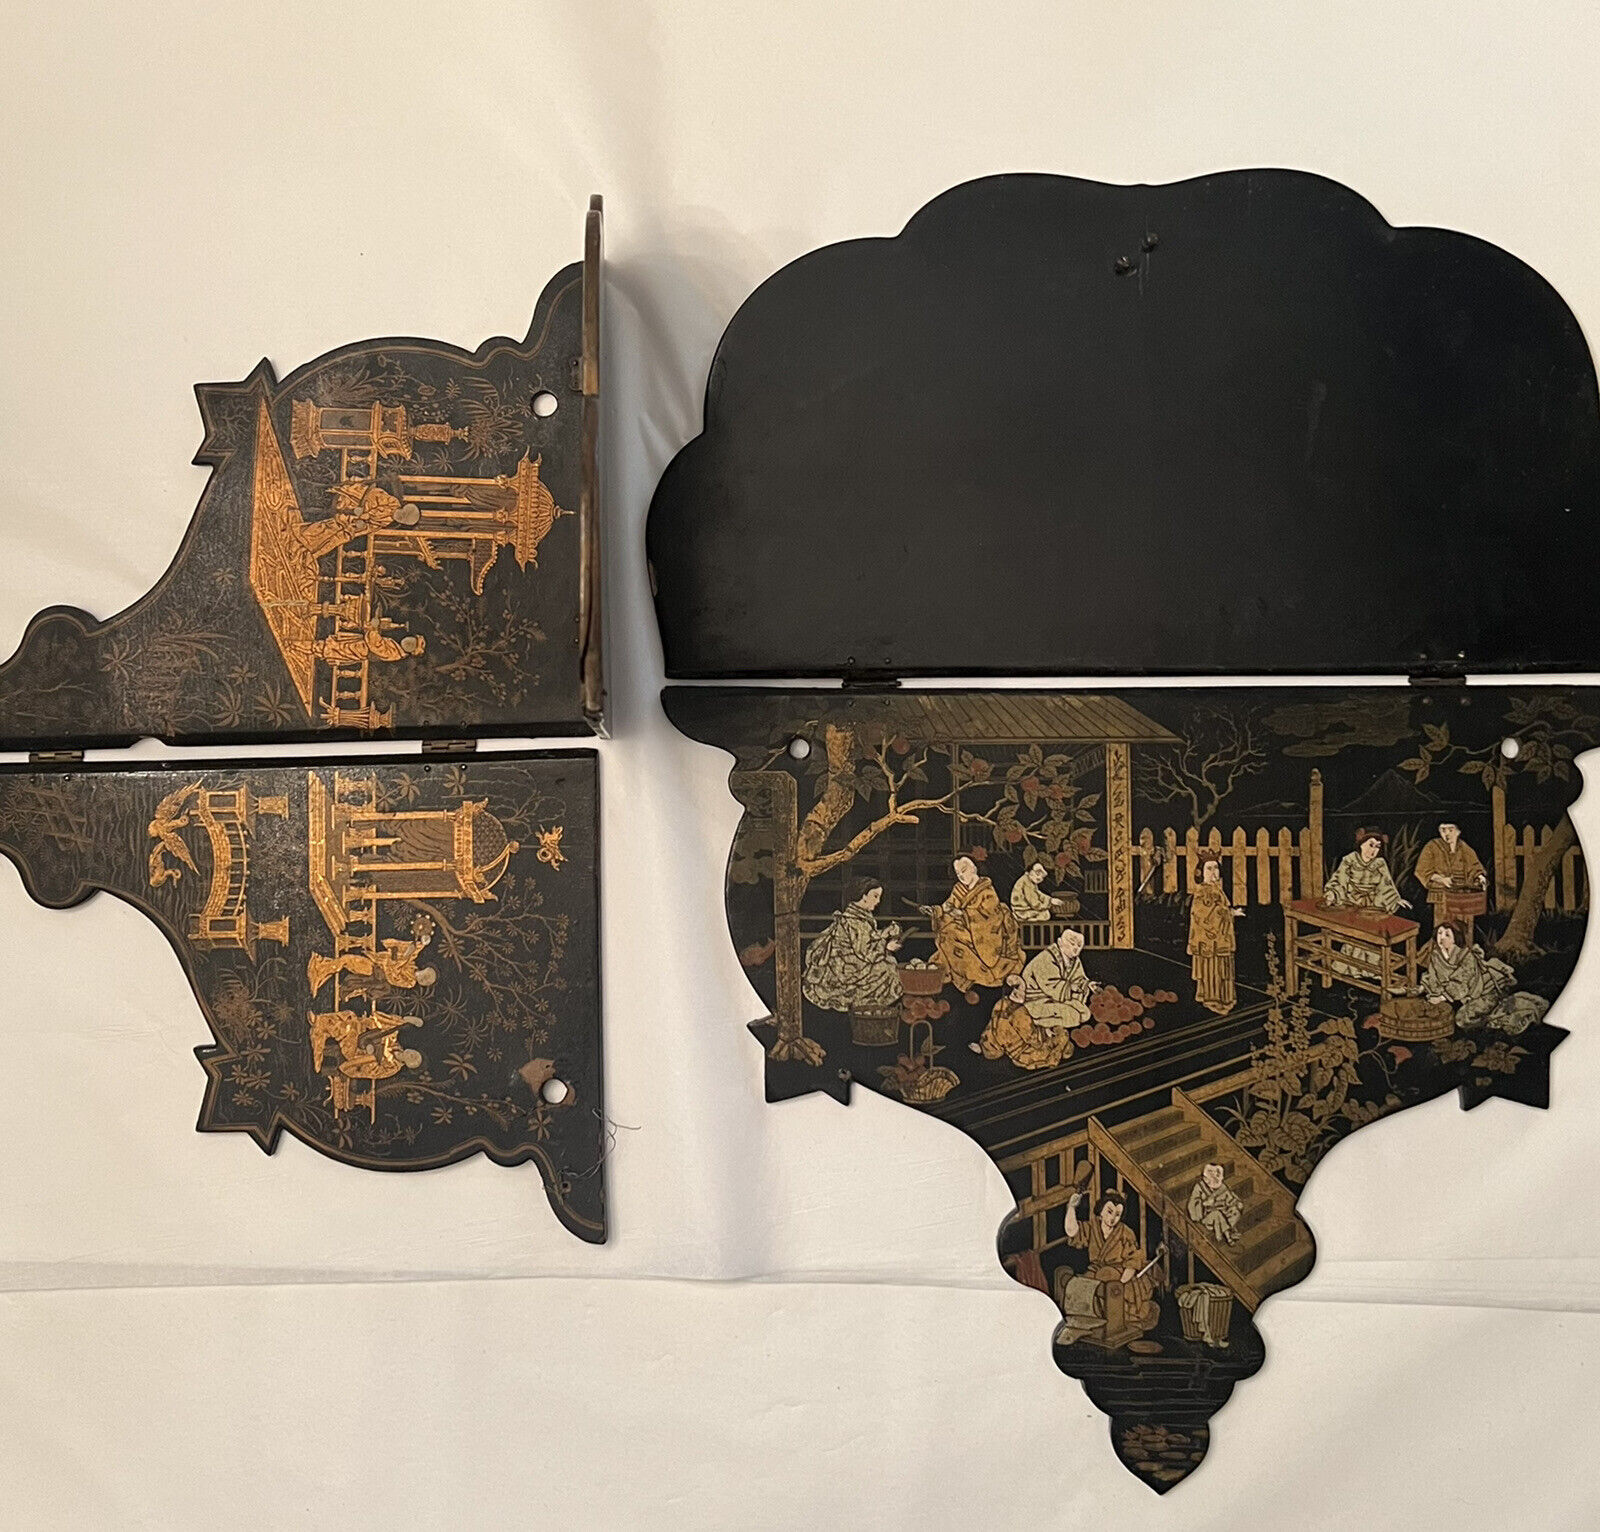 Antique Lacquered Papier Mache Black Chinoiserie Wall Shelf(s) Lot of 2  c. 1900 Без бренда